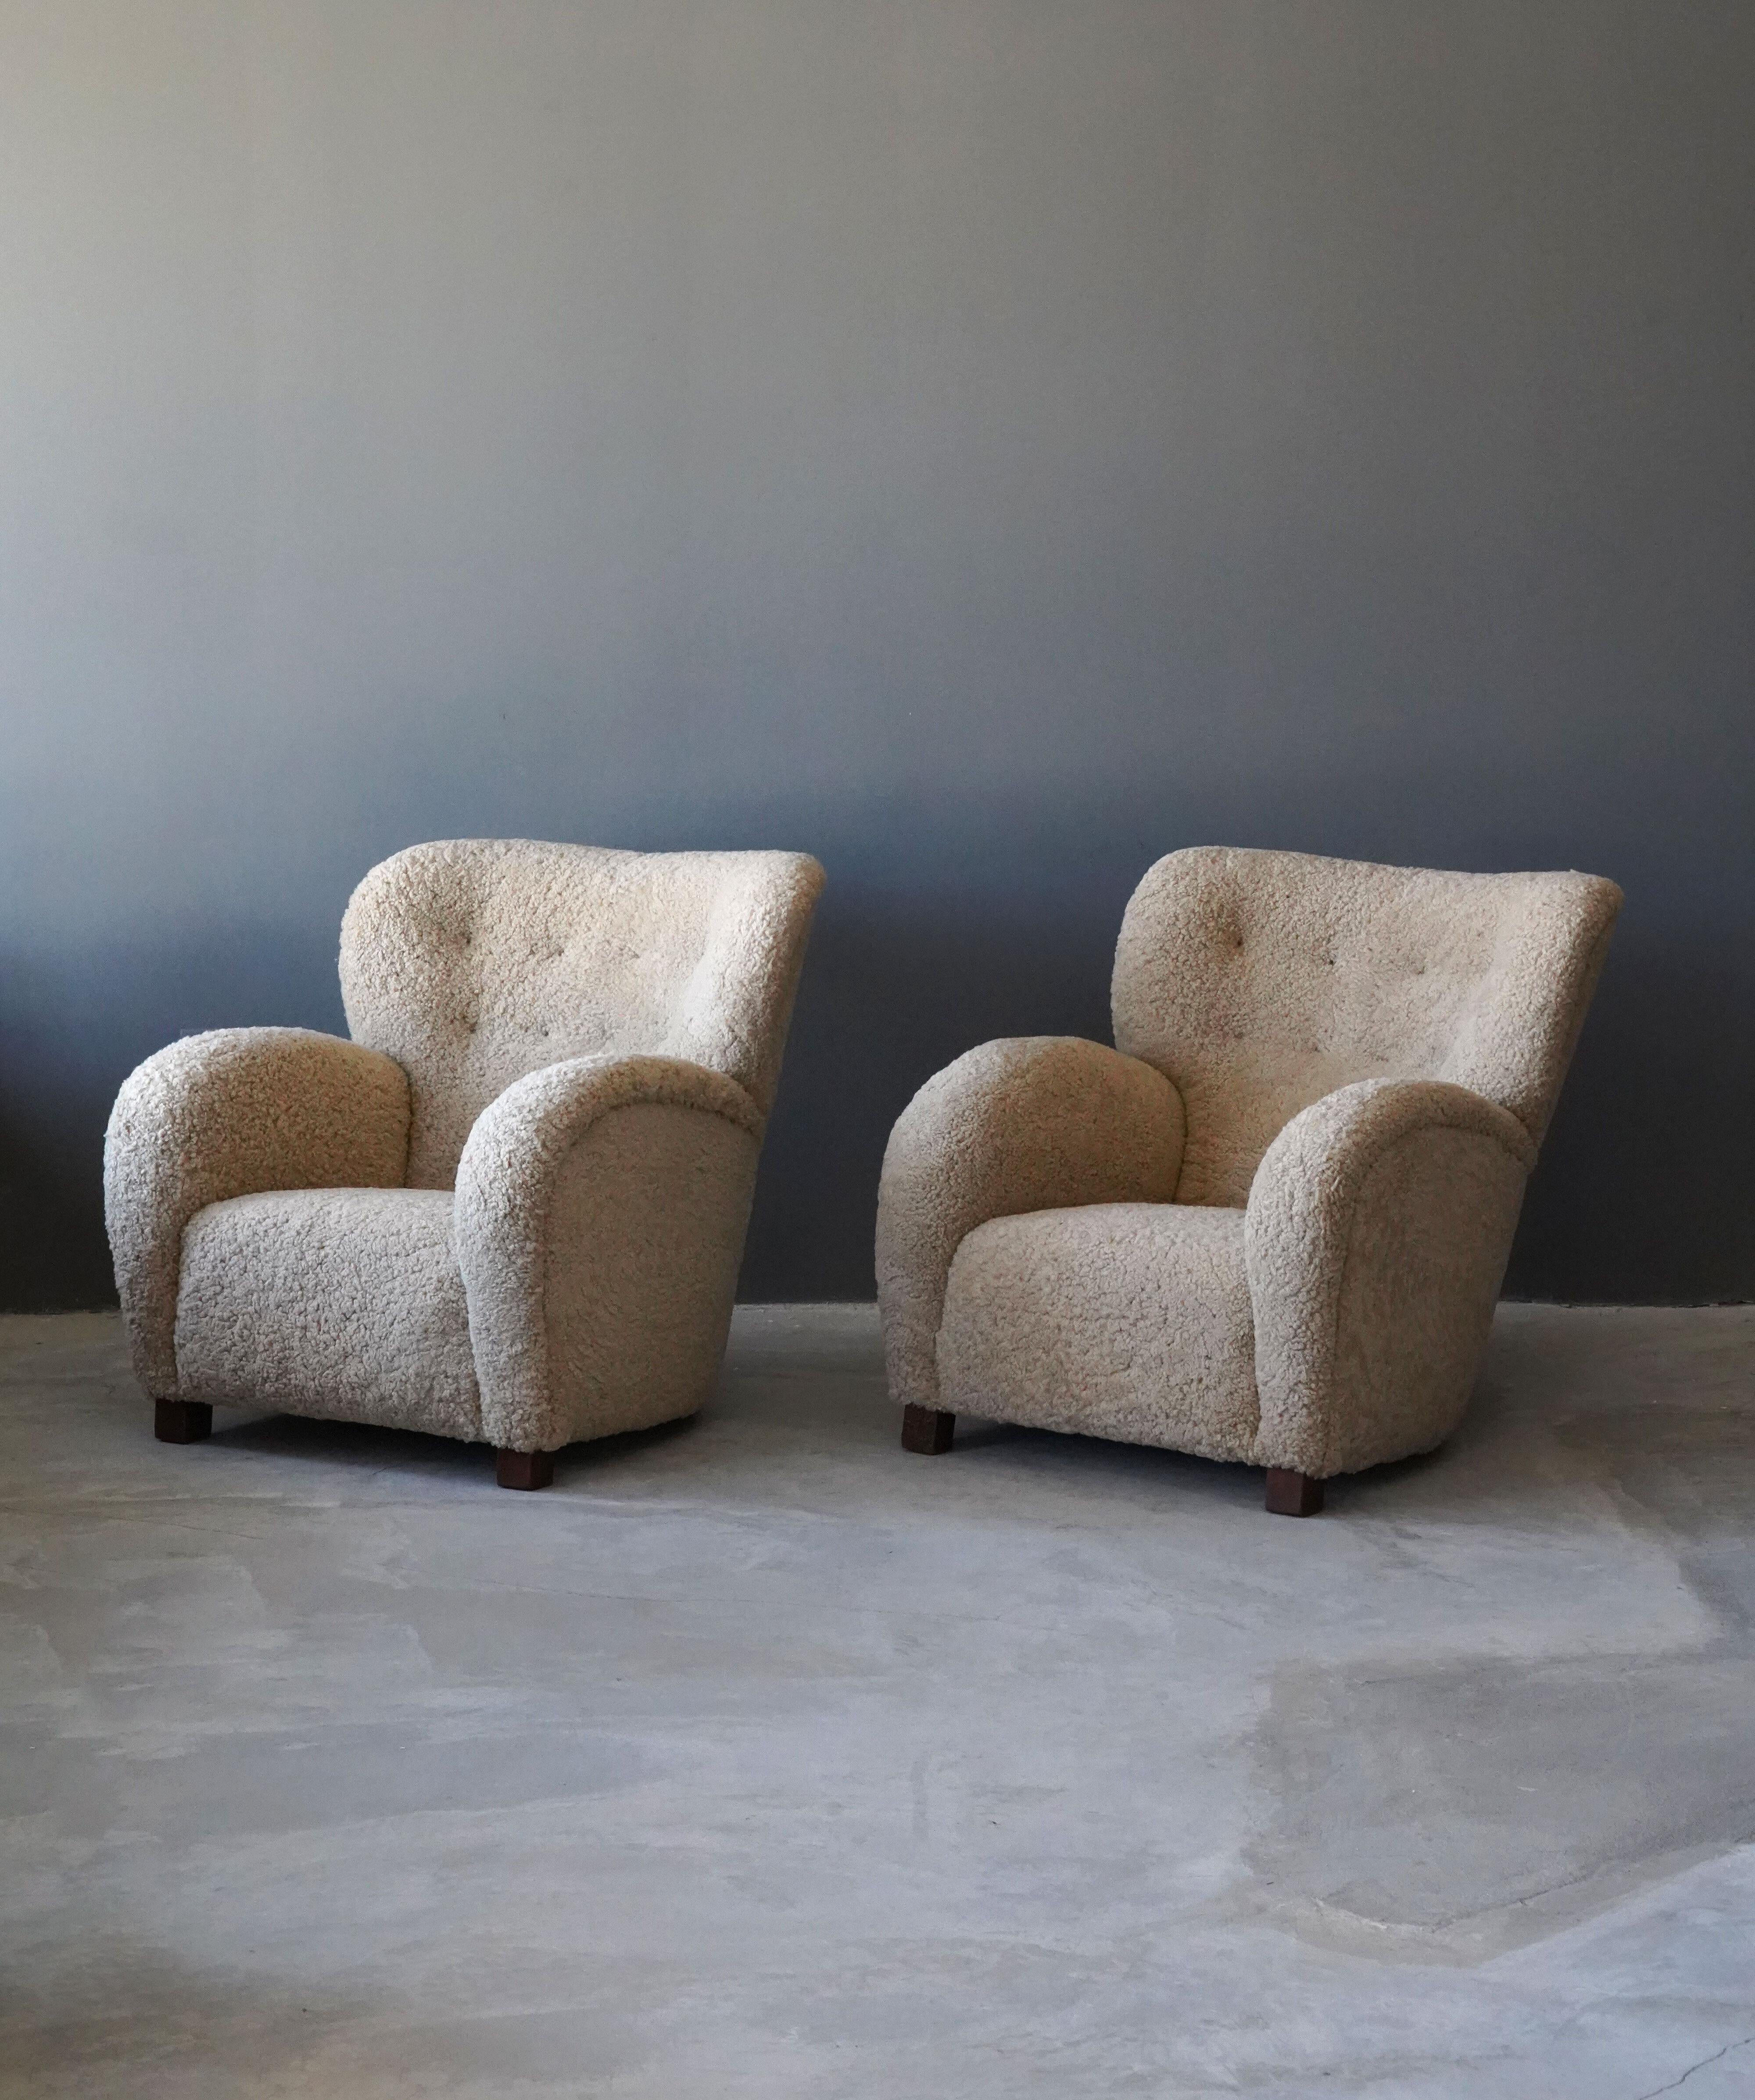 Two organic lounge chairs. Design attributed to Flemming Lassen. The chairs organic form is further enhanced by sheepskin upholstery. 

Other designers of the period include Gio Ponti, Märta Blomstedt, Vladimir Kagan, Jean Royère, and Arnold